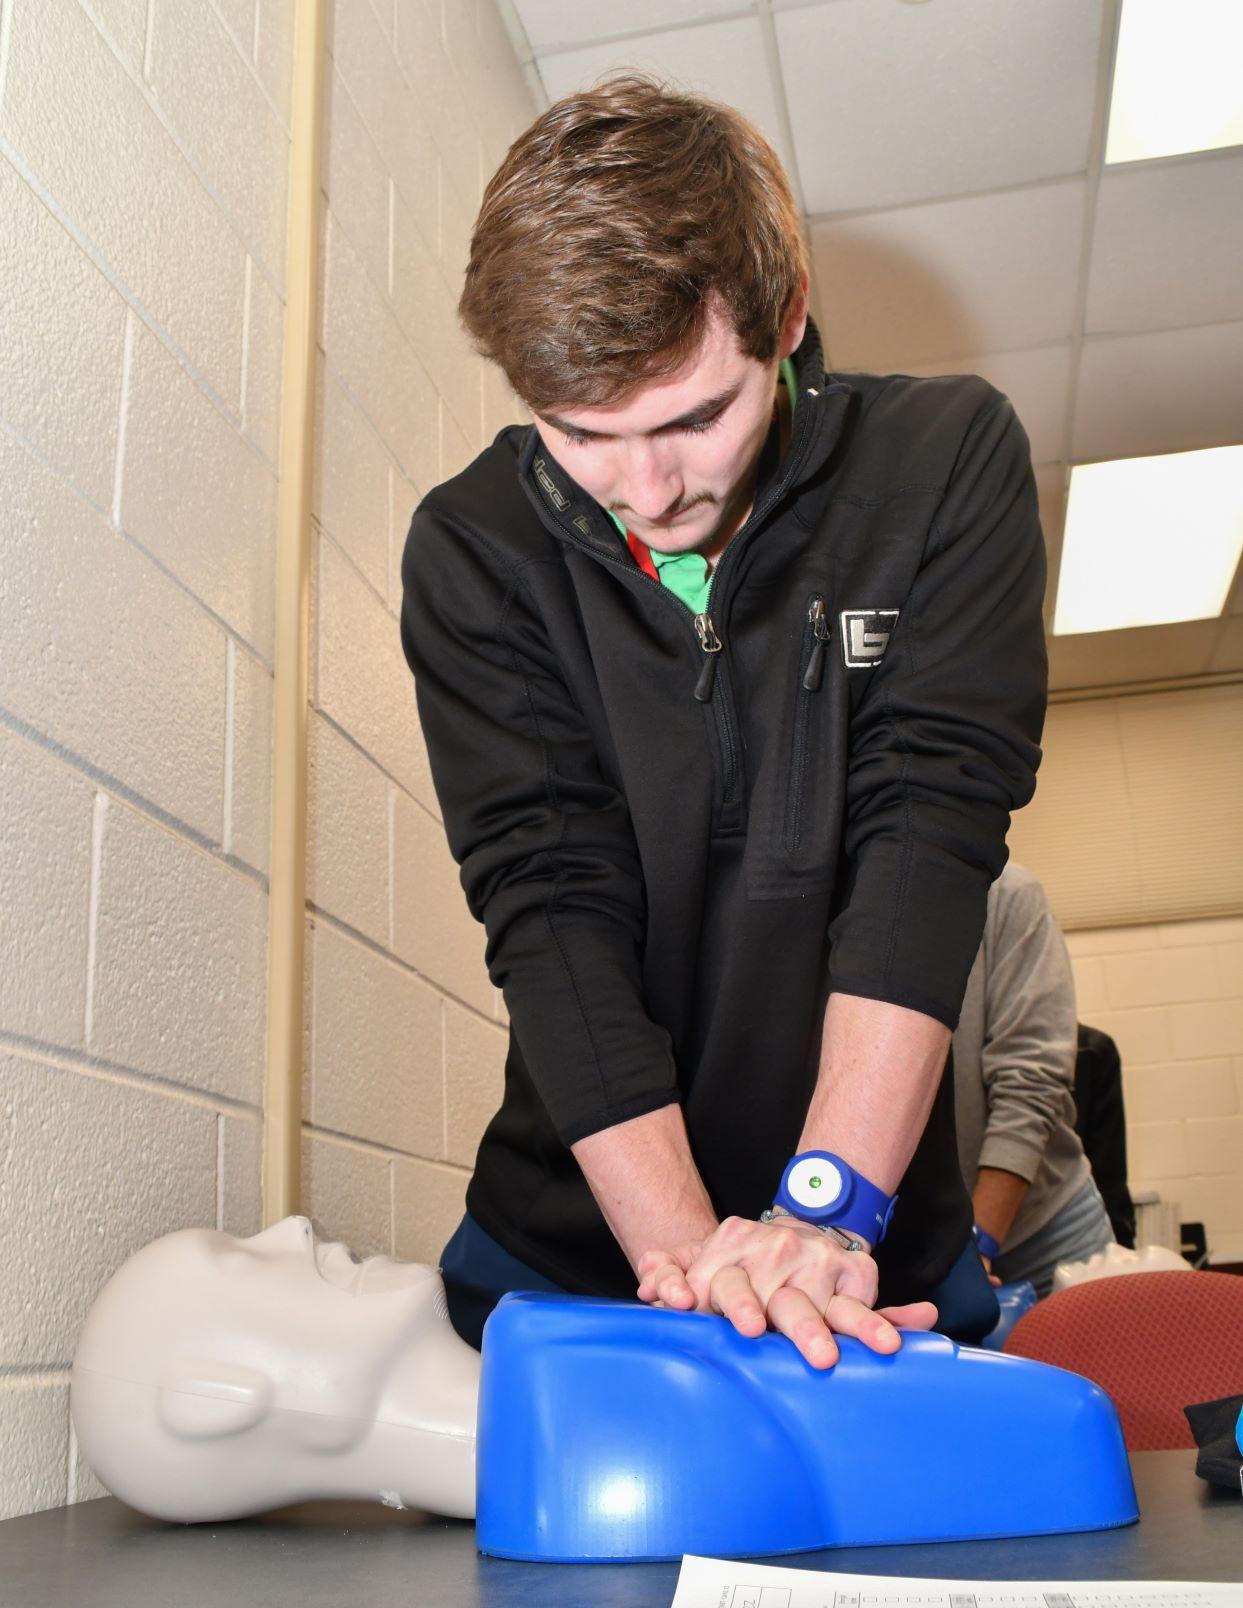 Jared Hodges, a student trainee engineer at Fleet Readiness Center East (FRCE), practices CPR techniques on a training dummy during a class focused on first aid, CPR and use of an automated external defibrillator. While the training is a mandatory requirement for some FRCE employees, the depot’s goal is to enhance readiness by training personnel throughout the work force. 